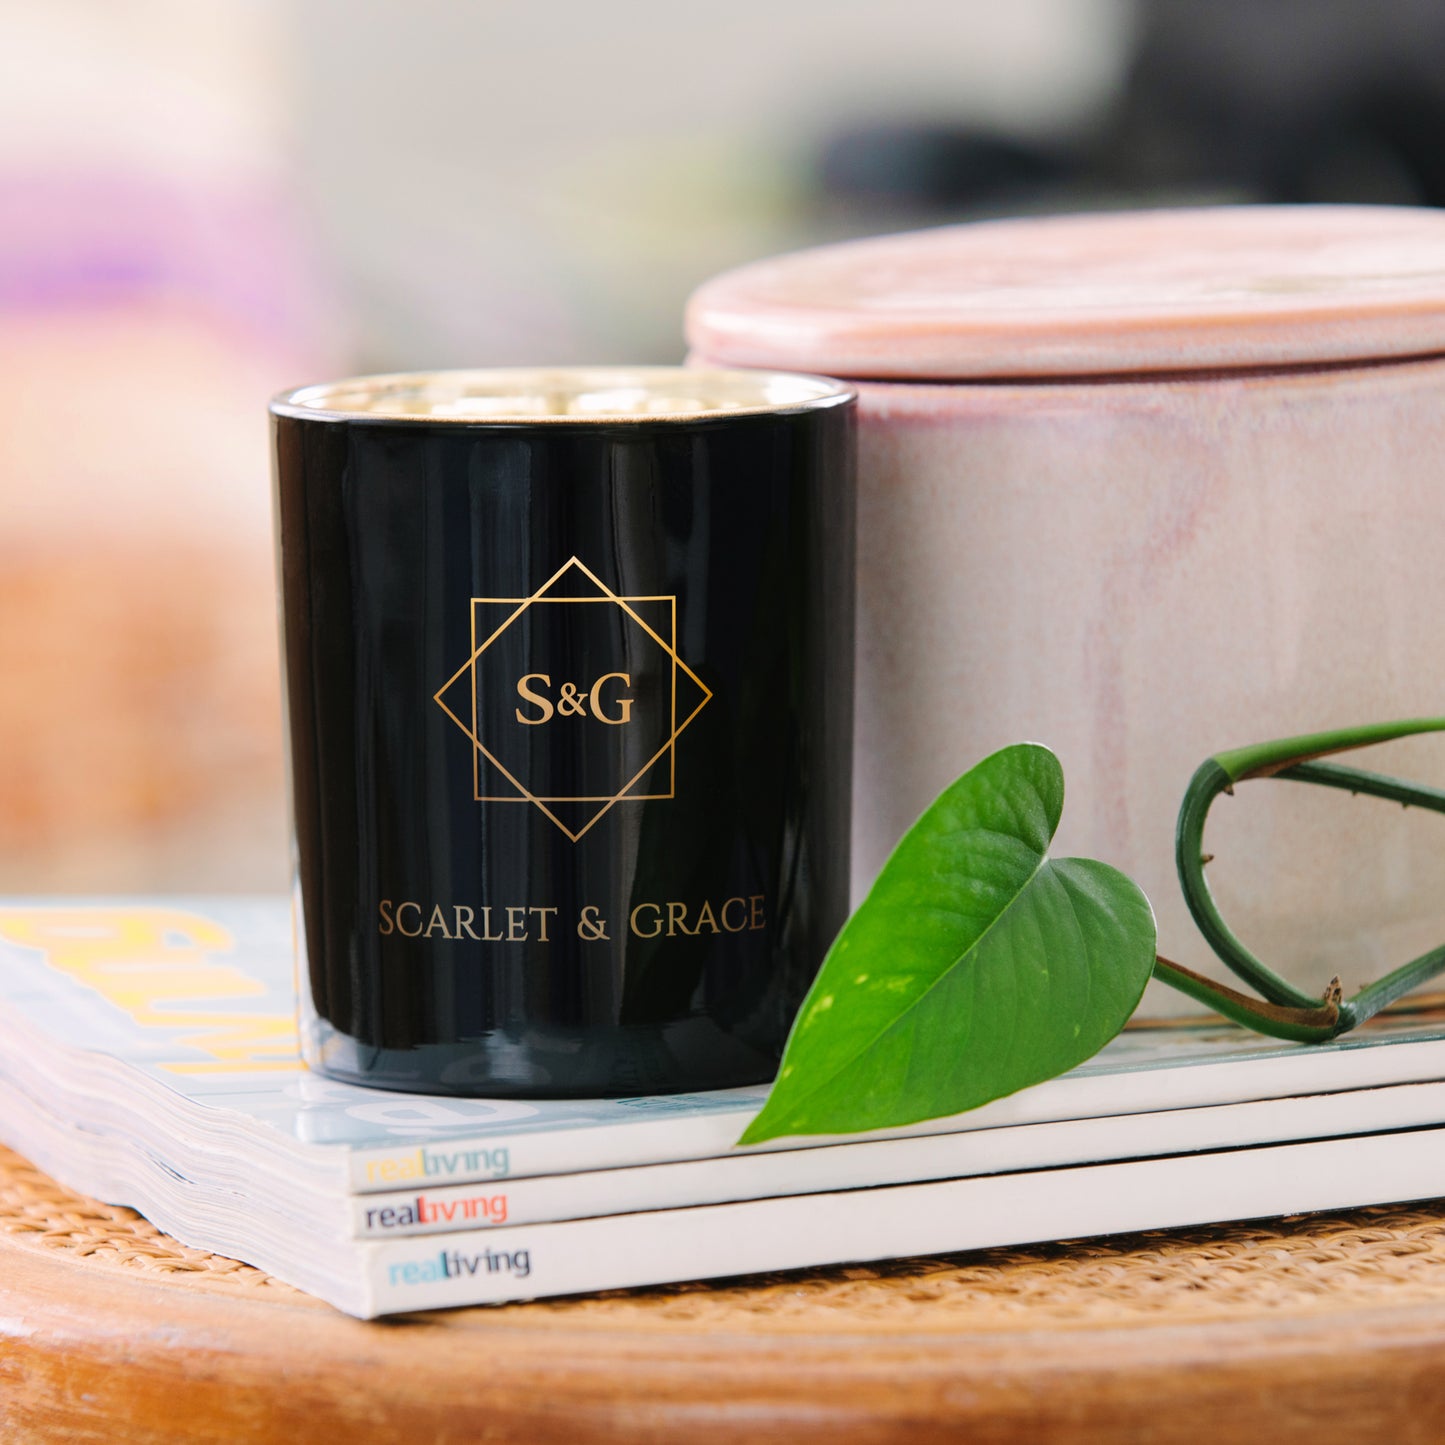 90 Mile Beach - 340gm Soy Wax Candle - Scarlet & Grace